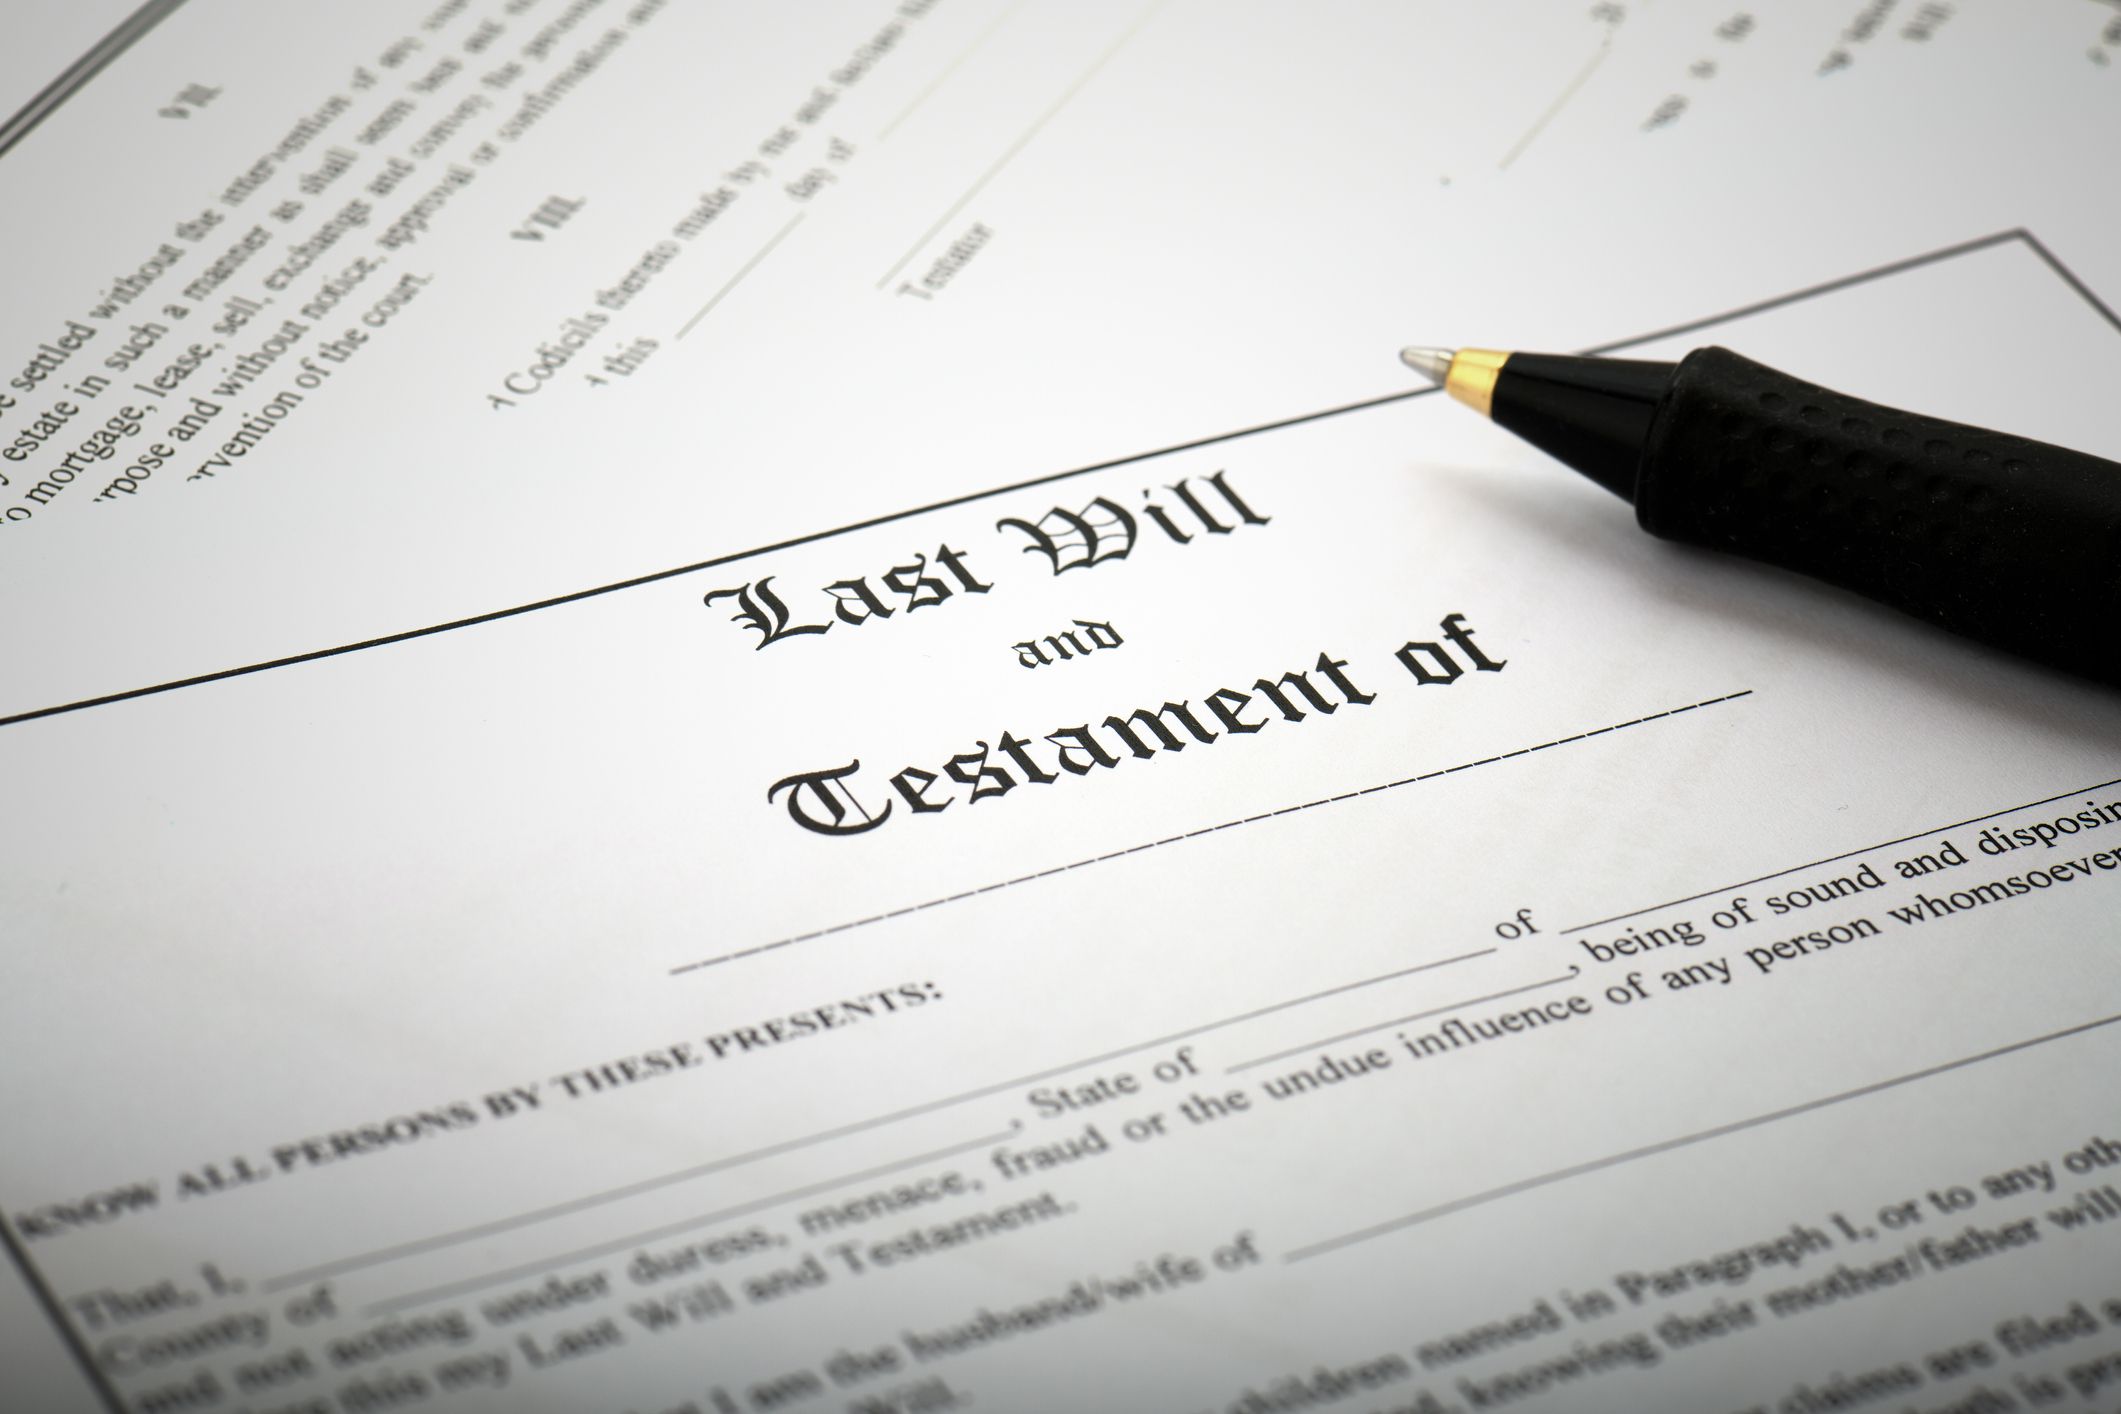 Are online wills probated after death?